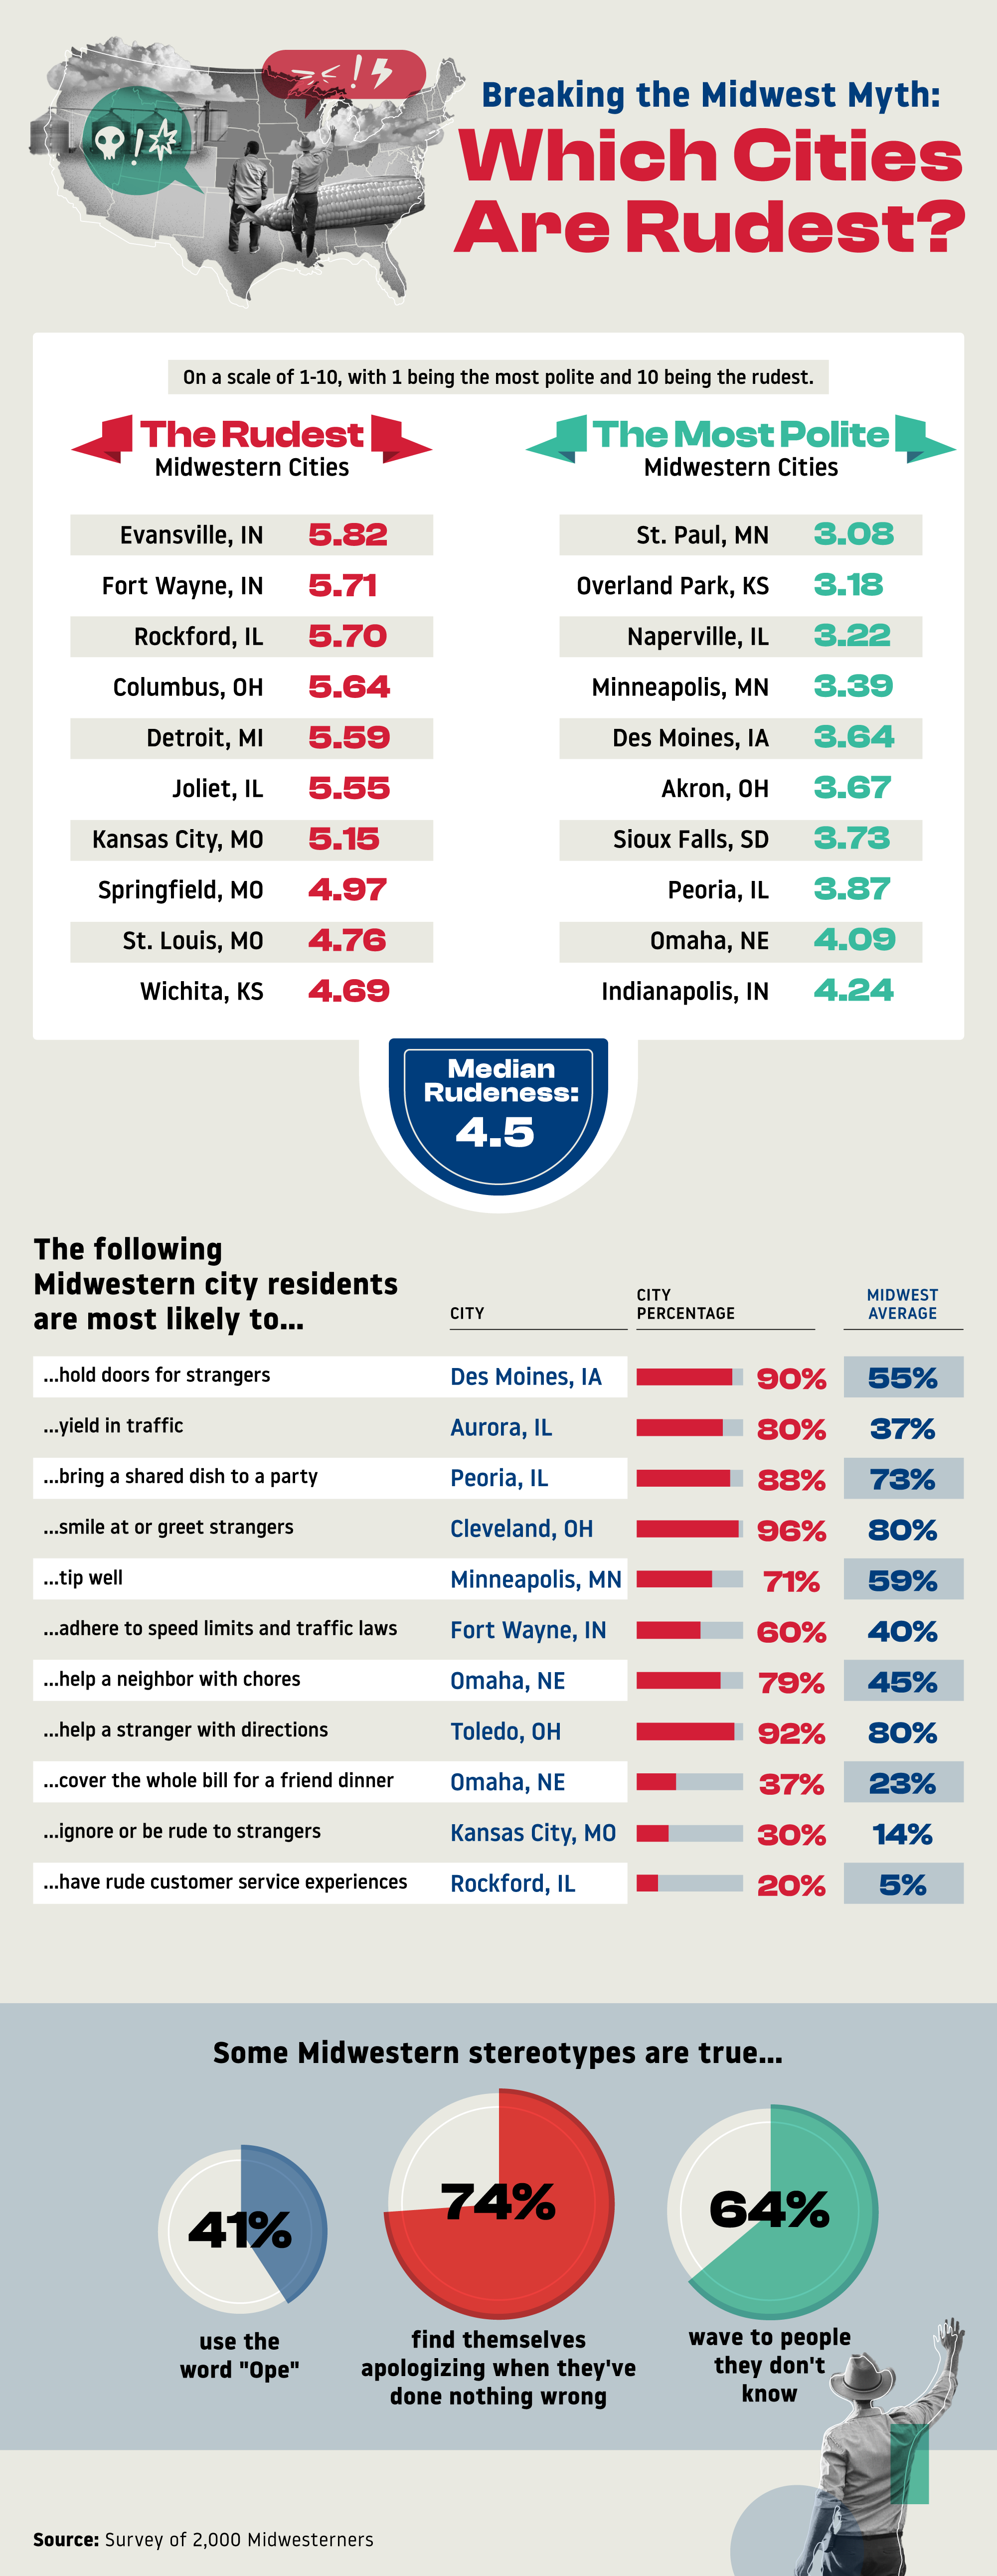 Infographic image detailing the outcome of a study on the rudest and most polite Midwest Cities